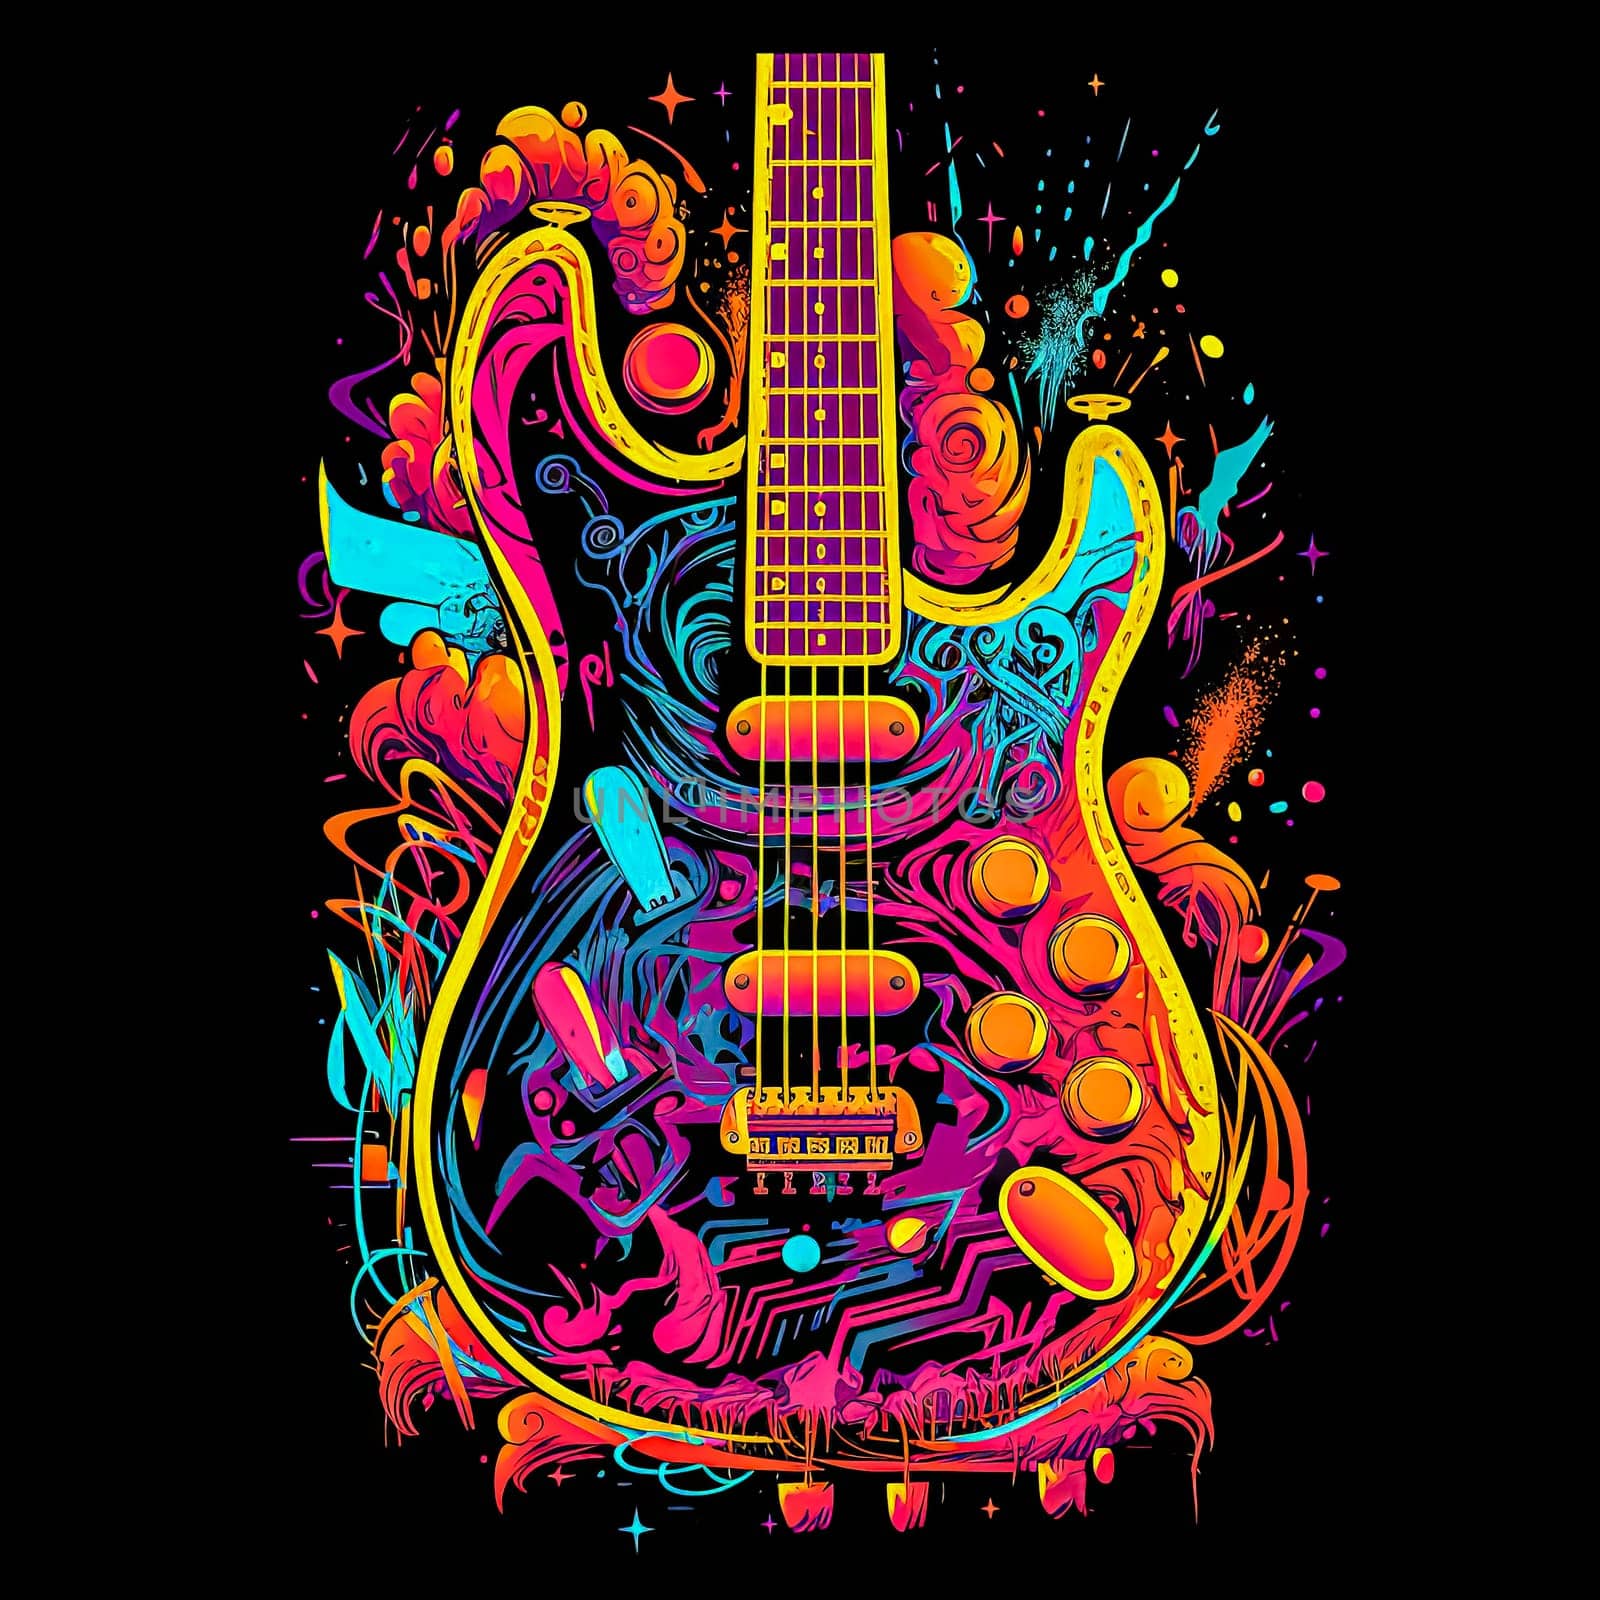 A colorful guitar is shown in a photo with smoke in the background. The guitar is the main focus of the image, and the smoke adds a sense of depth and atmosphere to the scene